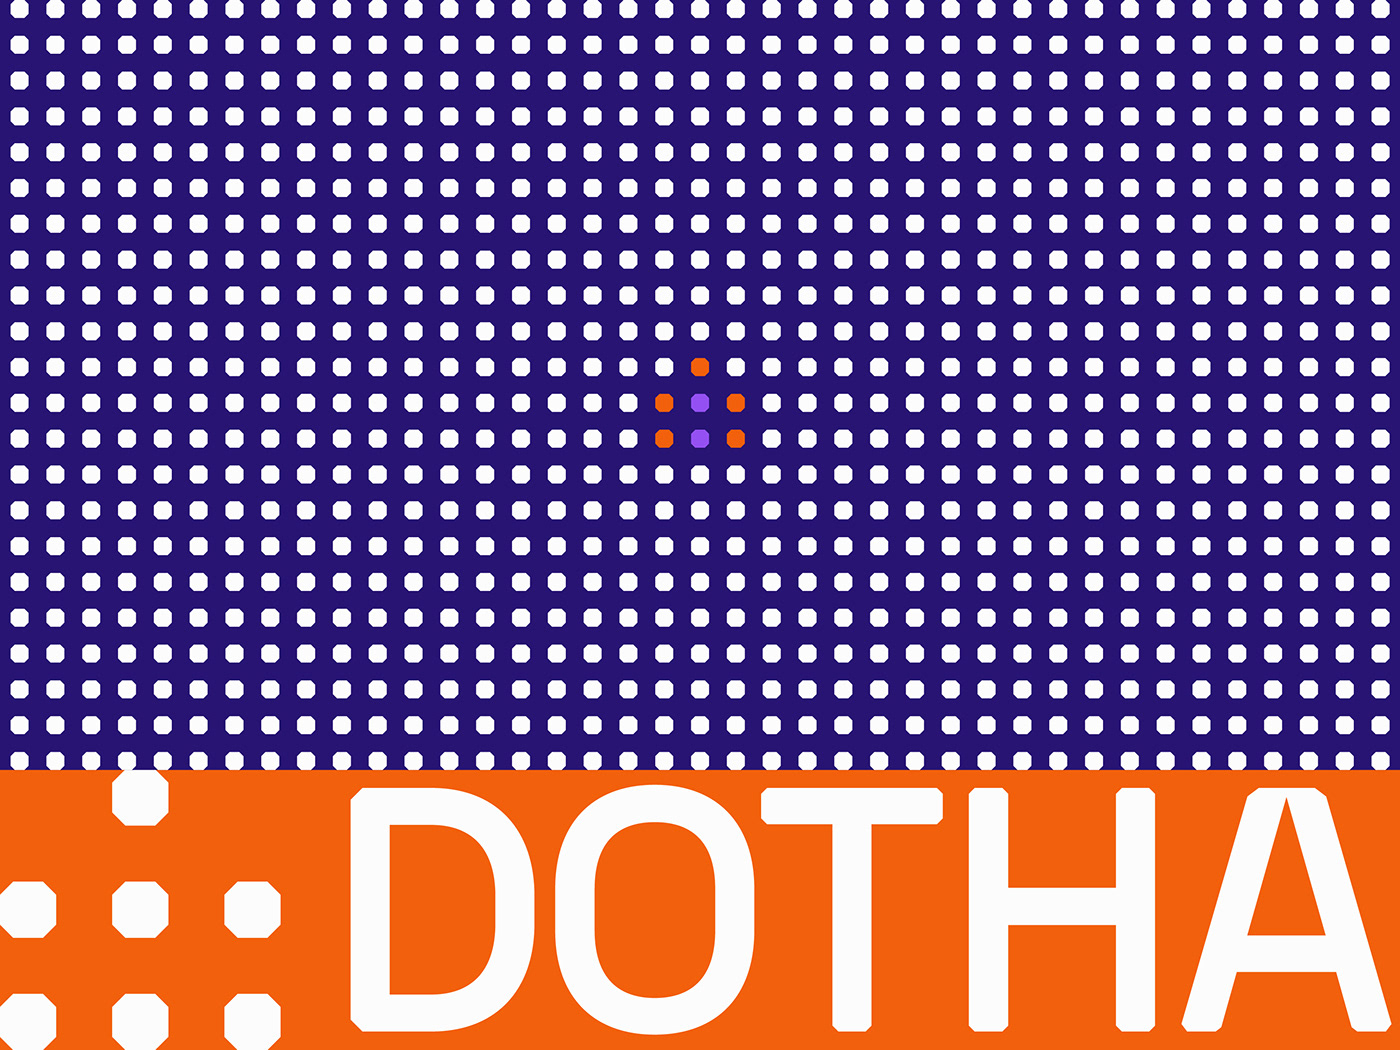 Pattern design and abstract asset of Dothabitum